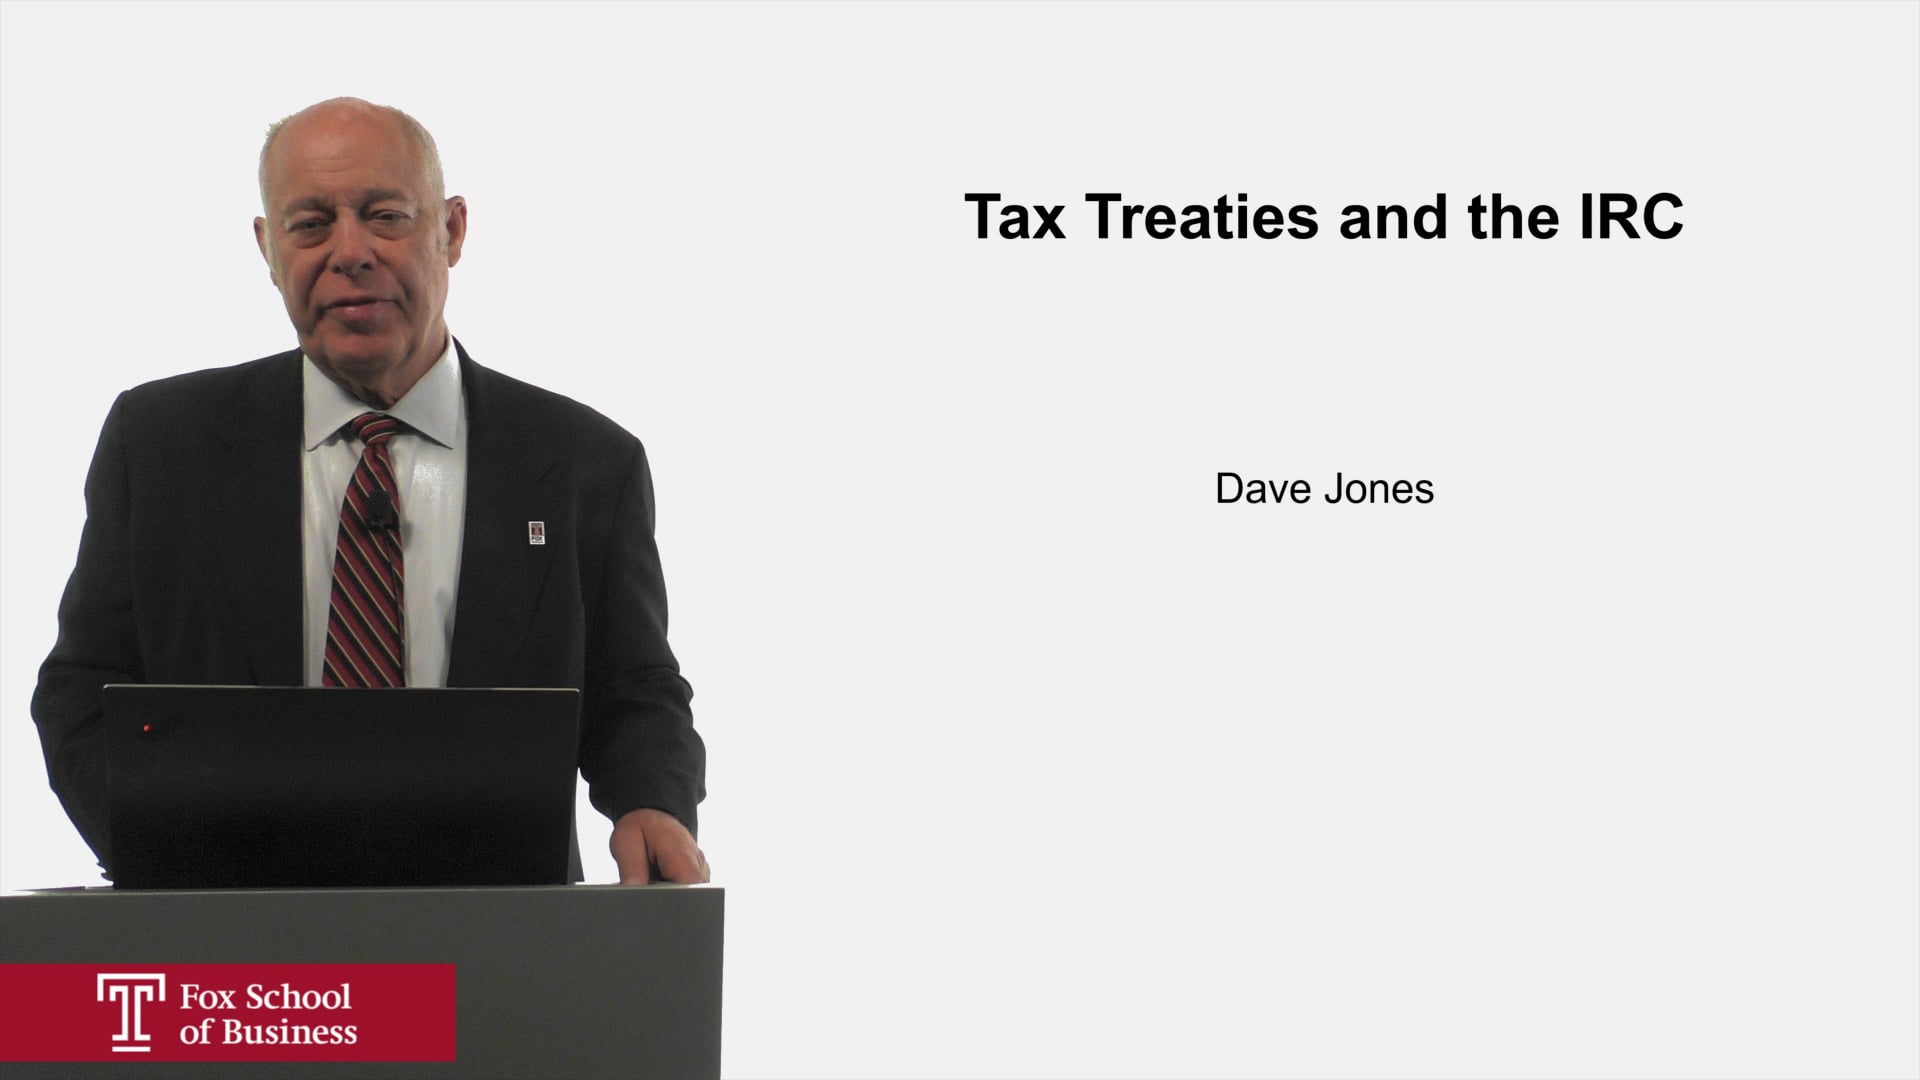 Tax Treaties and the IRC